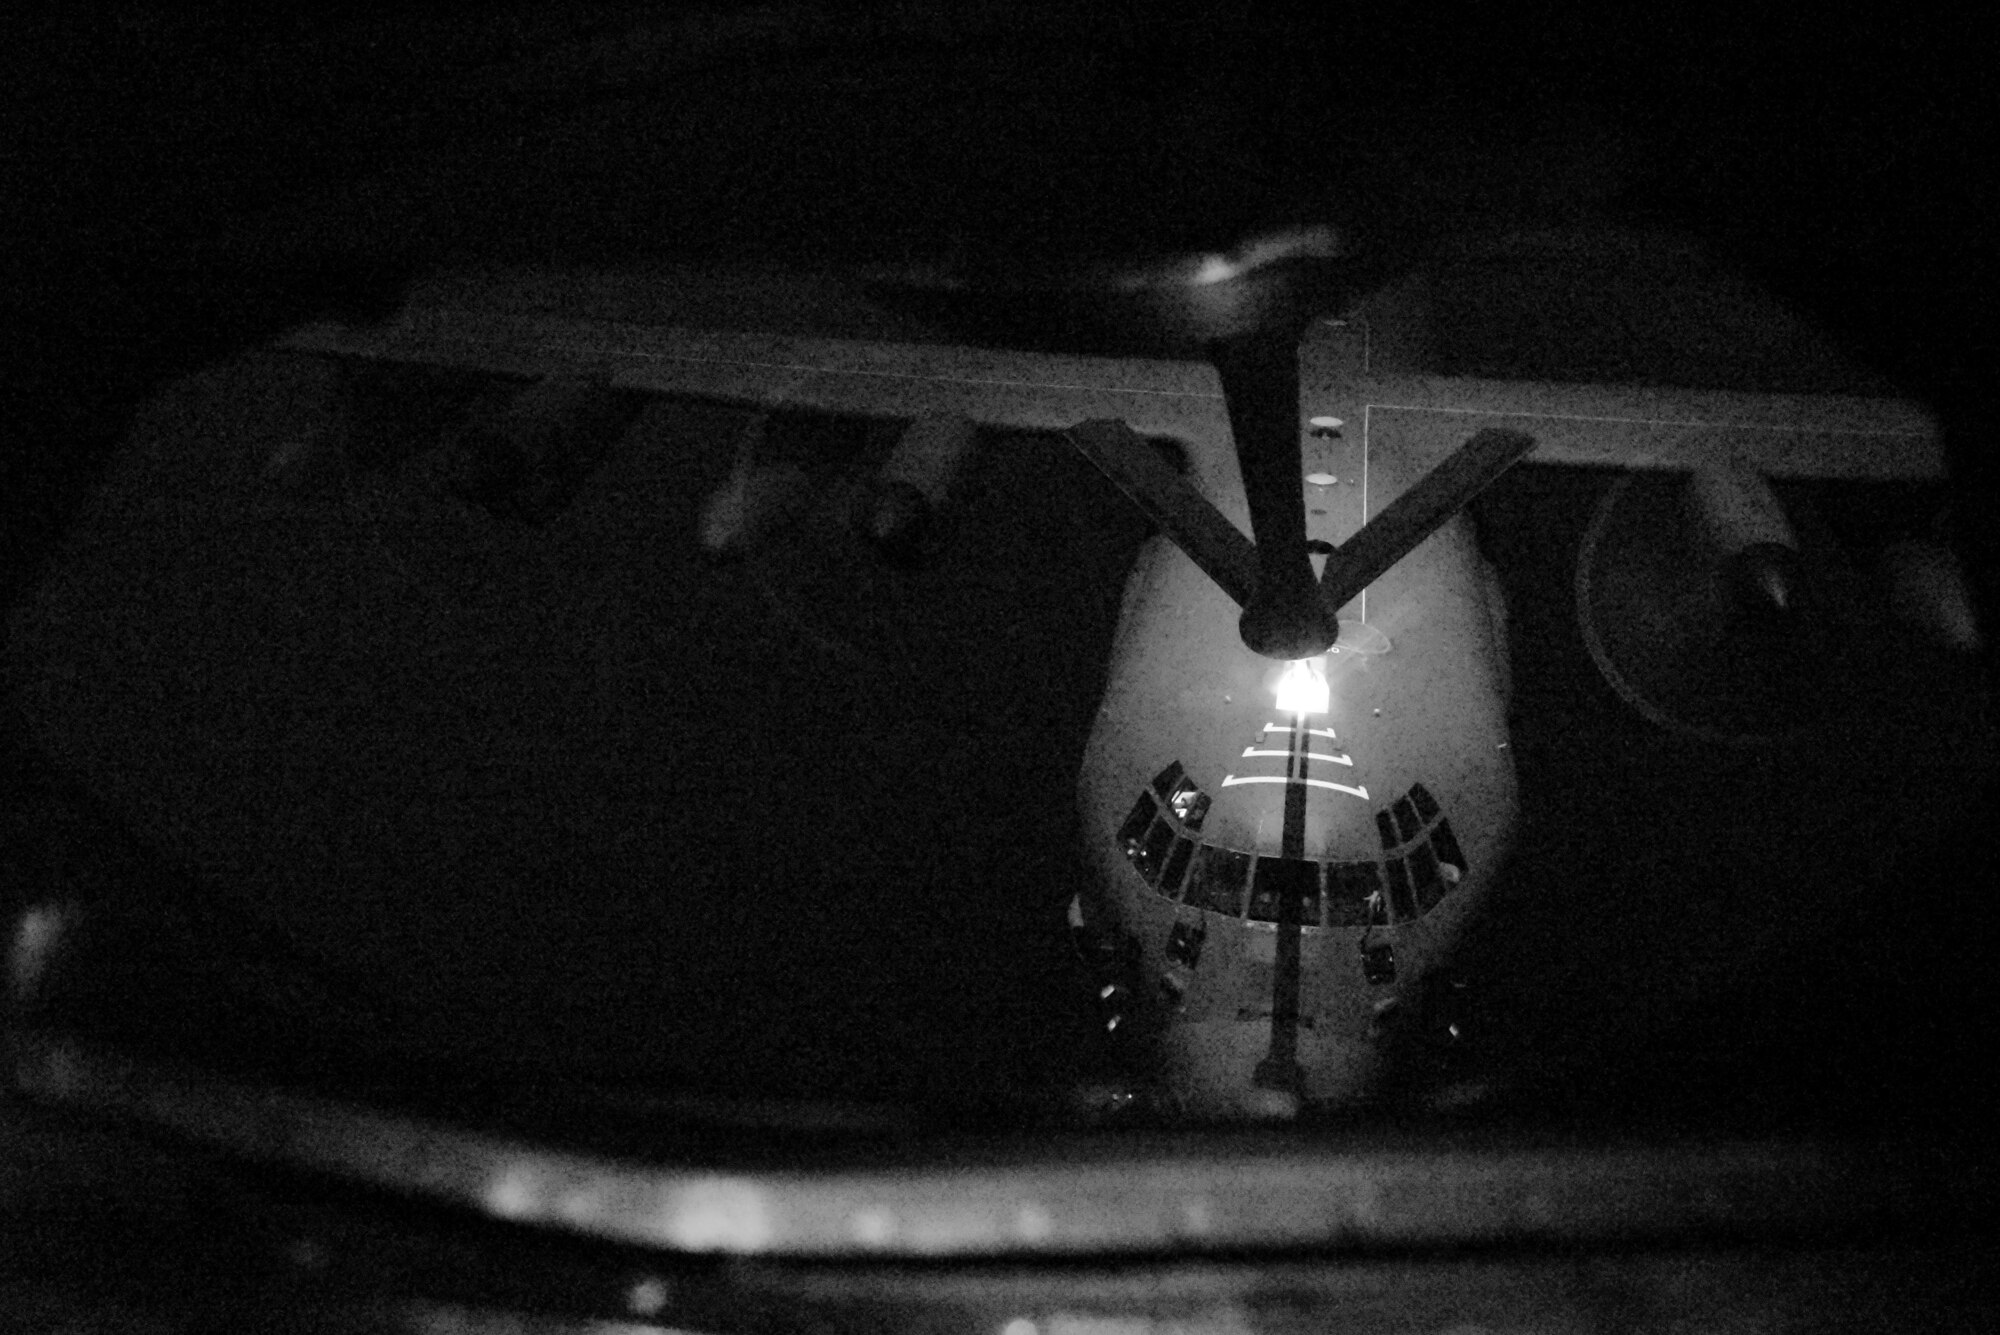 An AC-130J Ghostrider gunship with the 1st Special Operations Wing, Hurlburt Field, Florida, receives fuel from a KC-135 Stratotanker with the 92nd Air Refueling Wing, during training over Florida, Feb. 4, 2020. The 92nd ARW provides Airmen the ability to fly, fight and win in any mission, worldwide. (U.S. Air Force photo by Airman 1st Class Ryan Gomez)